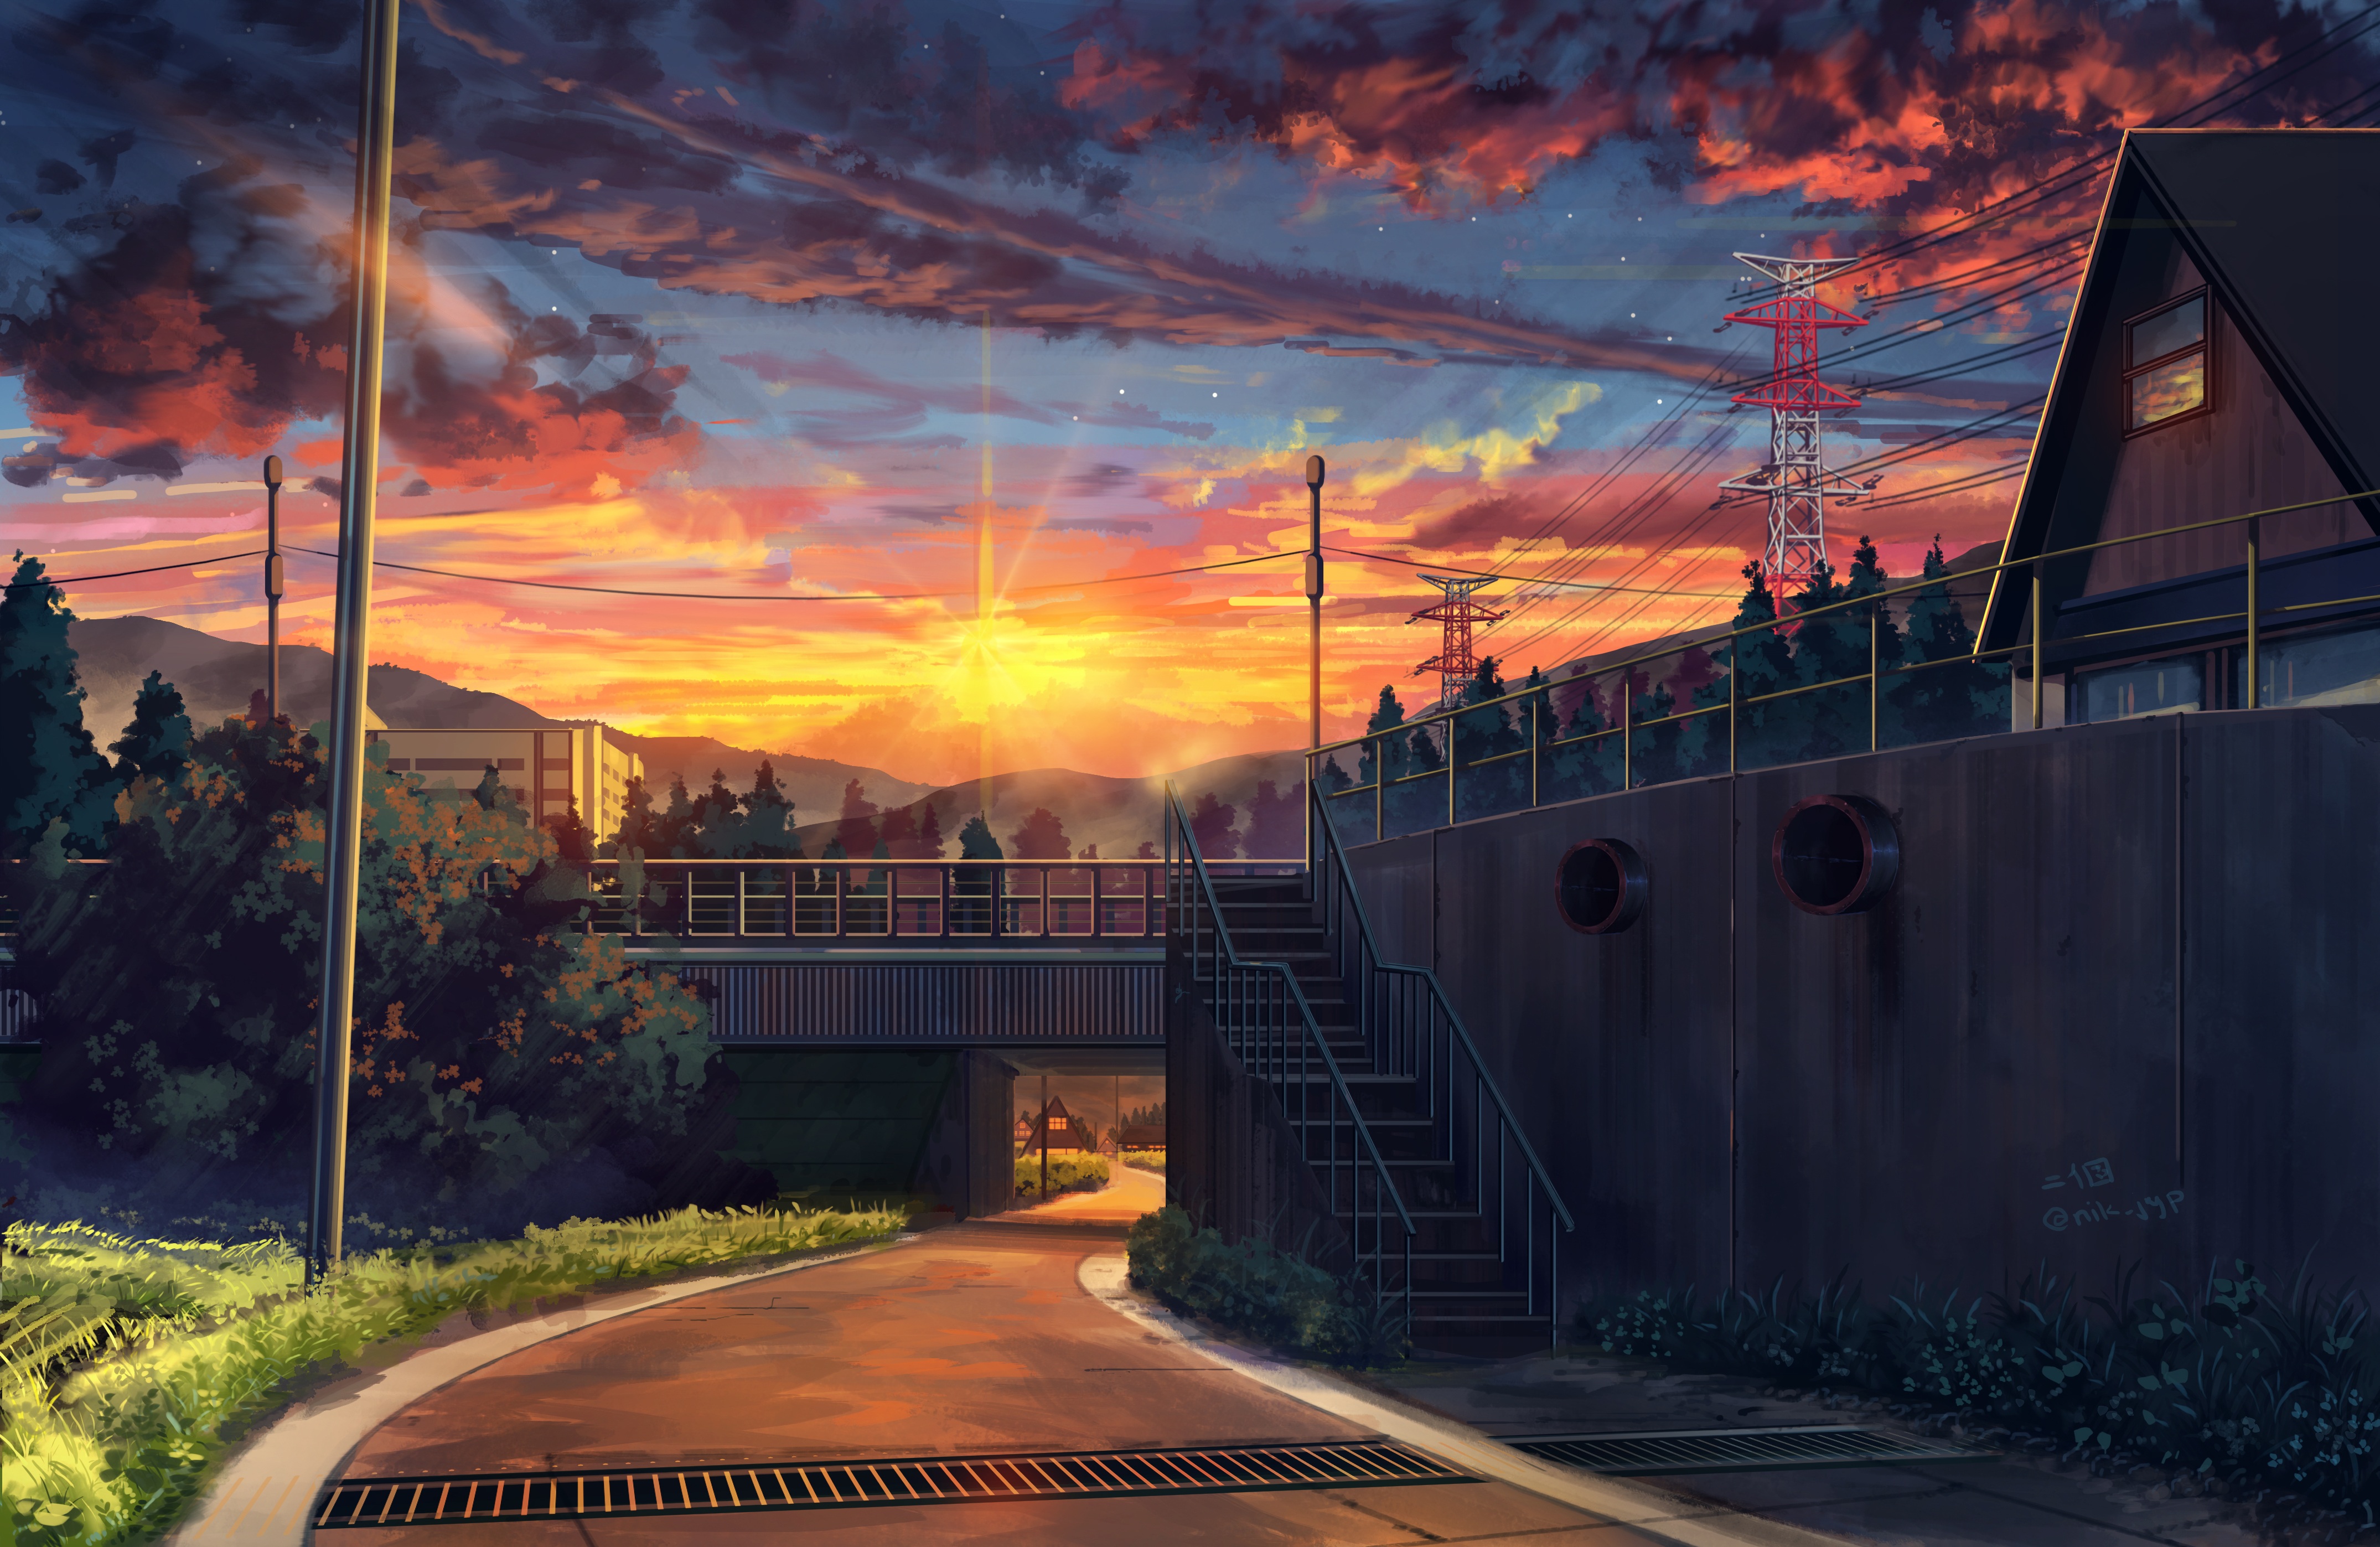 Wallpaper  city street anime road 5 Centimeters Per Second ART  screenshot 1920x1200 px urban area 1920x1200  CoolWallpapers  577315   HD Wallpapers  WallHere